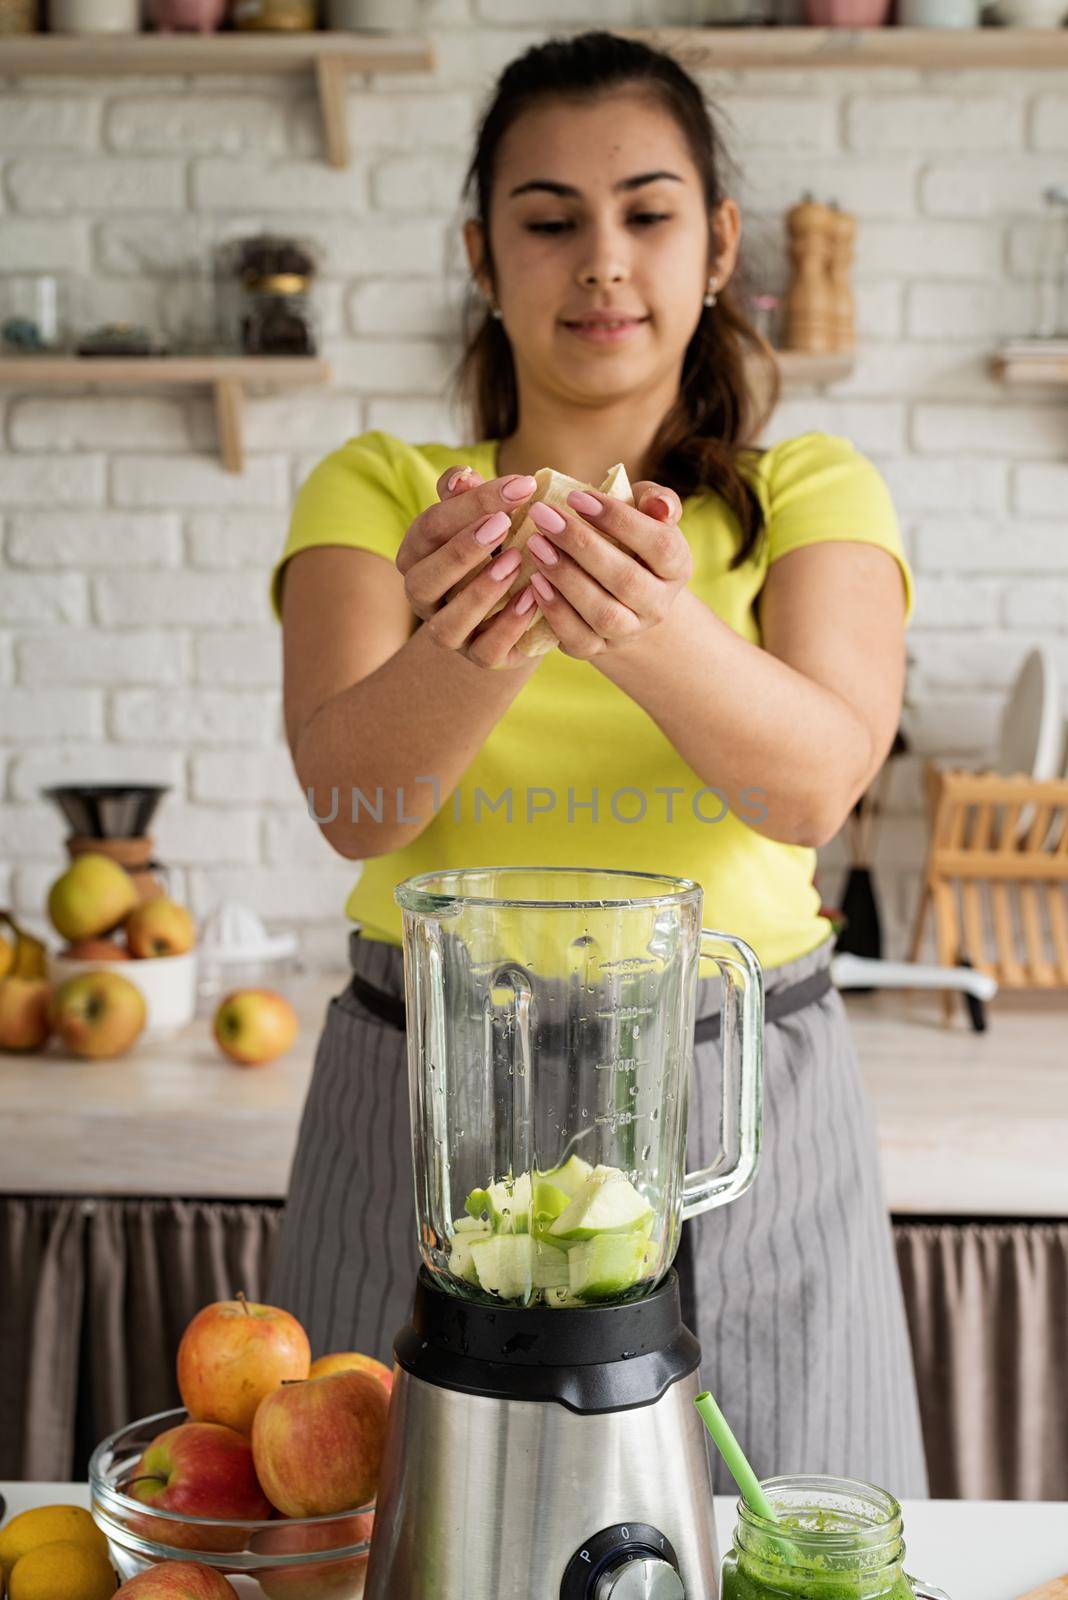 Preparing healthy foods. Healthy eating and dieting. Young brunette woman making banana smoothie at home kitchen